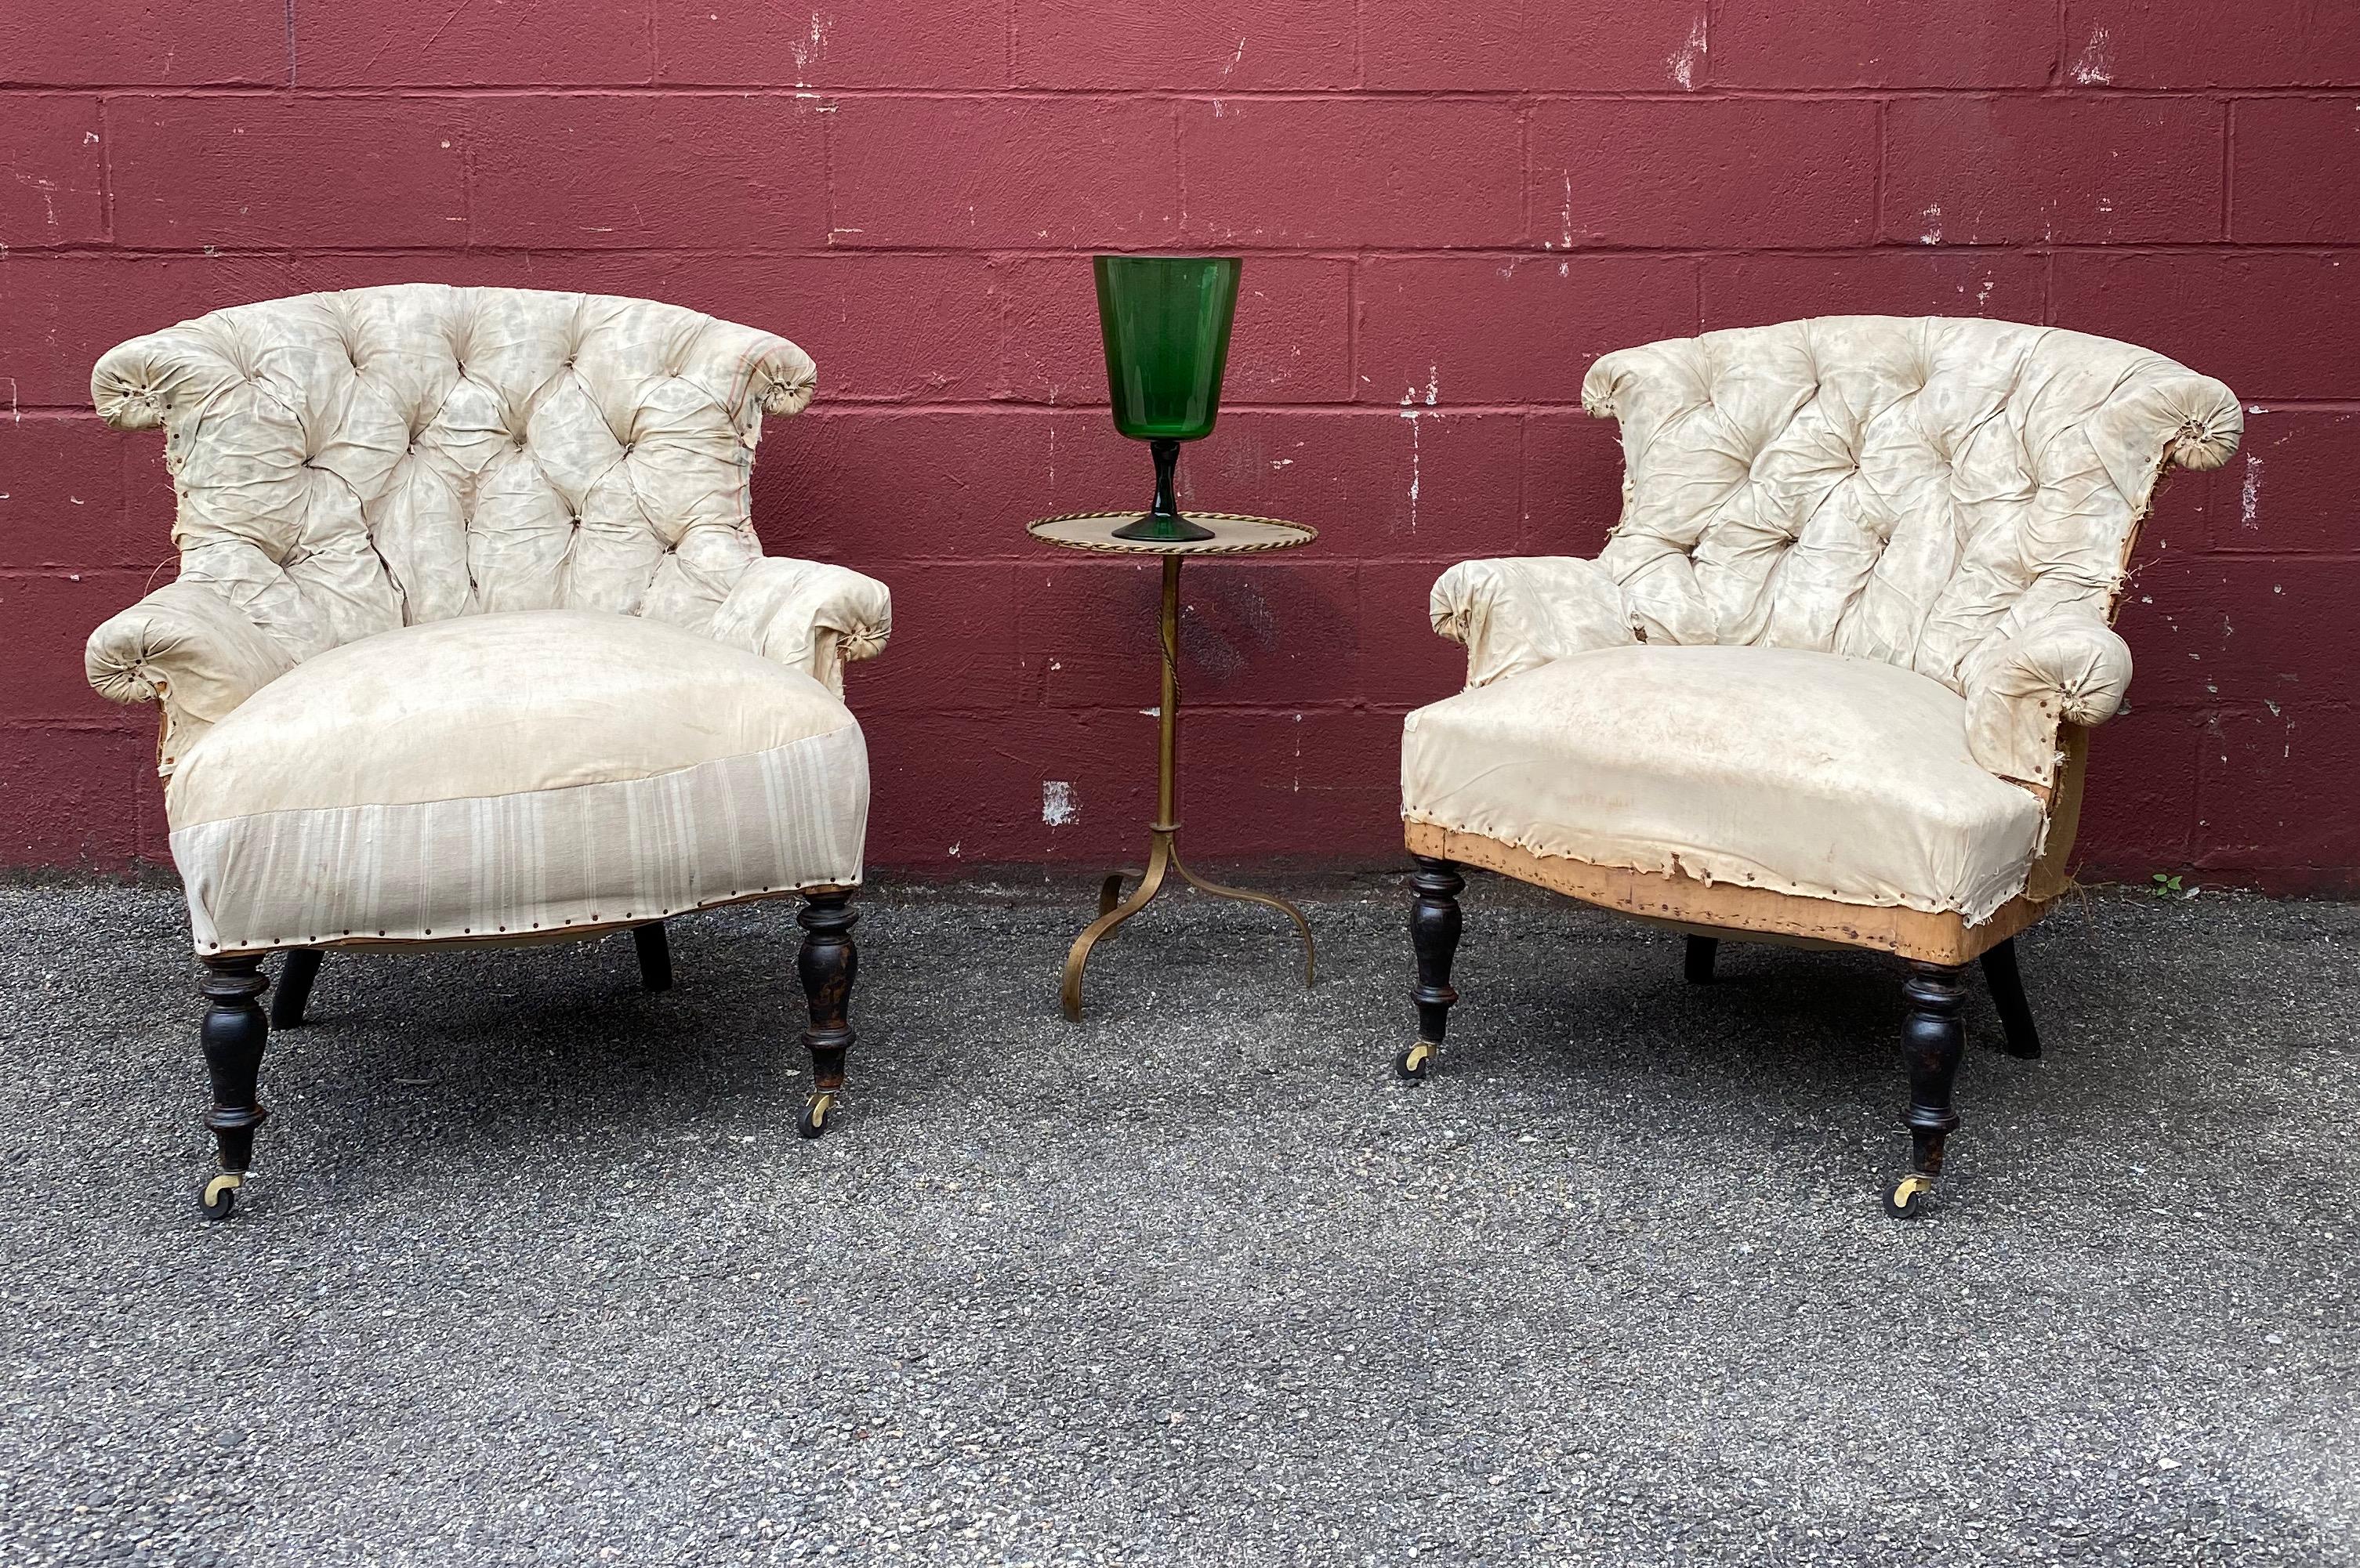 Pair of French Napoleon III  armchairs that have been stripped down to the original muslin. The backs are heavily tufted and have an elegant scroll that carries through to the arms. New casters have been placed on the front legs to create a